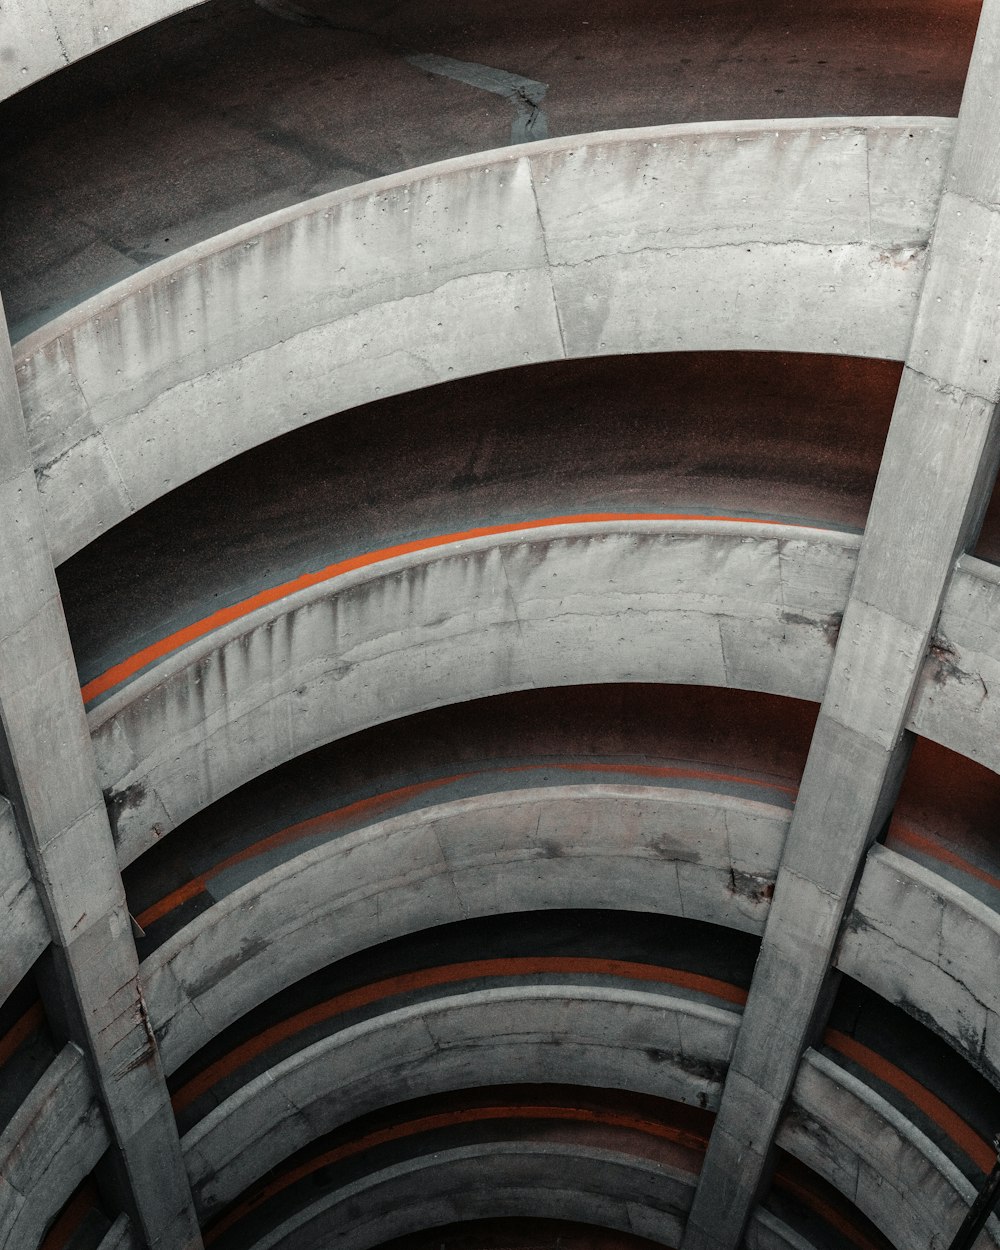 a close up of a concrete structure with orange lines